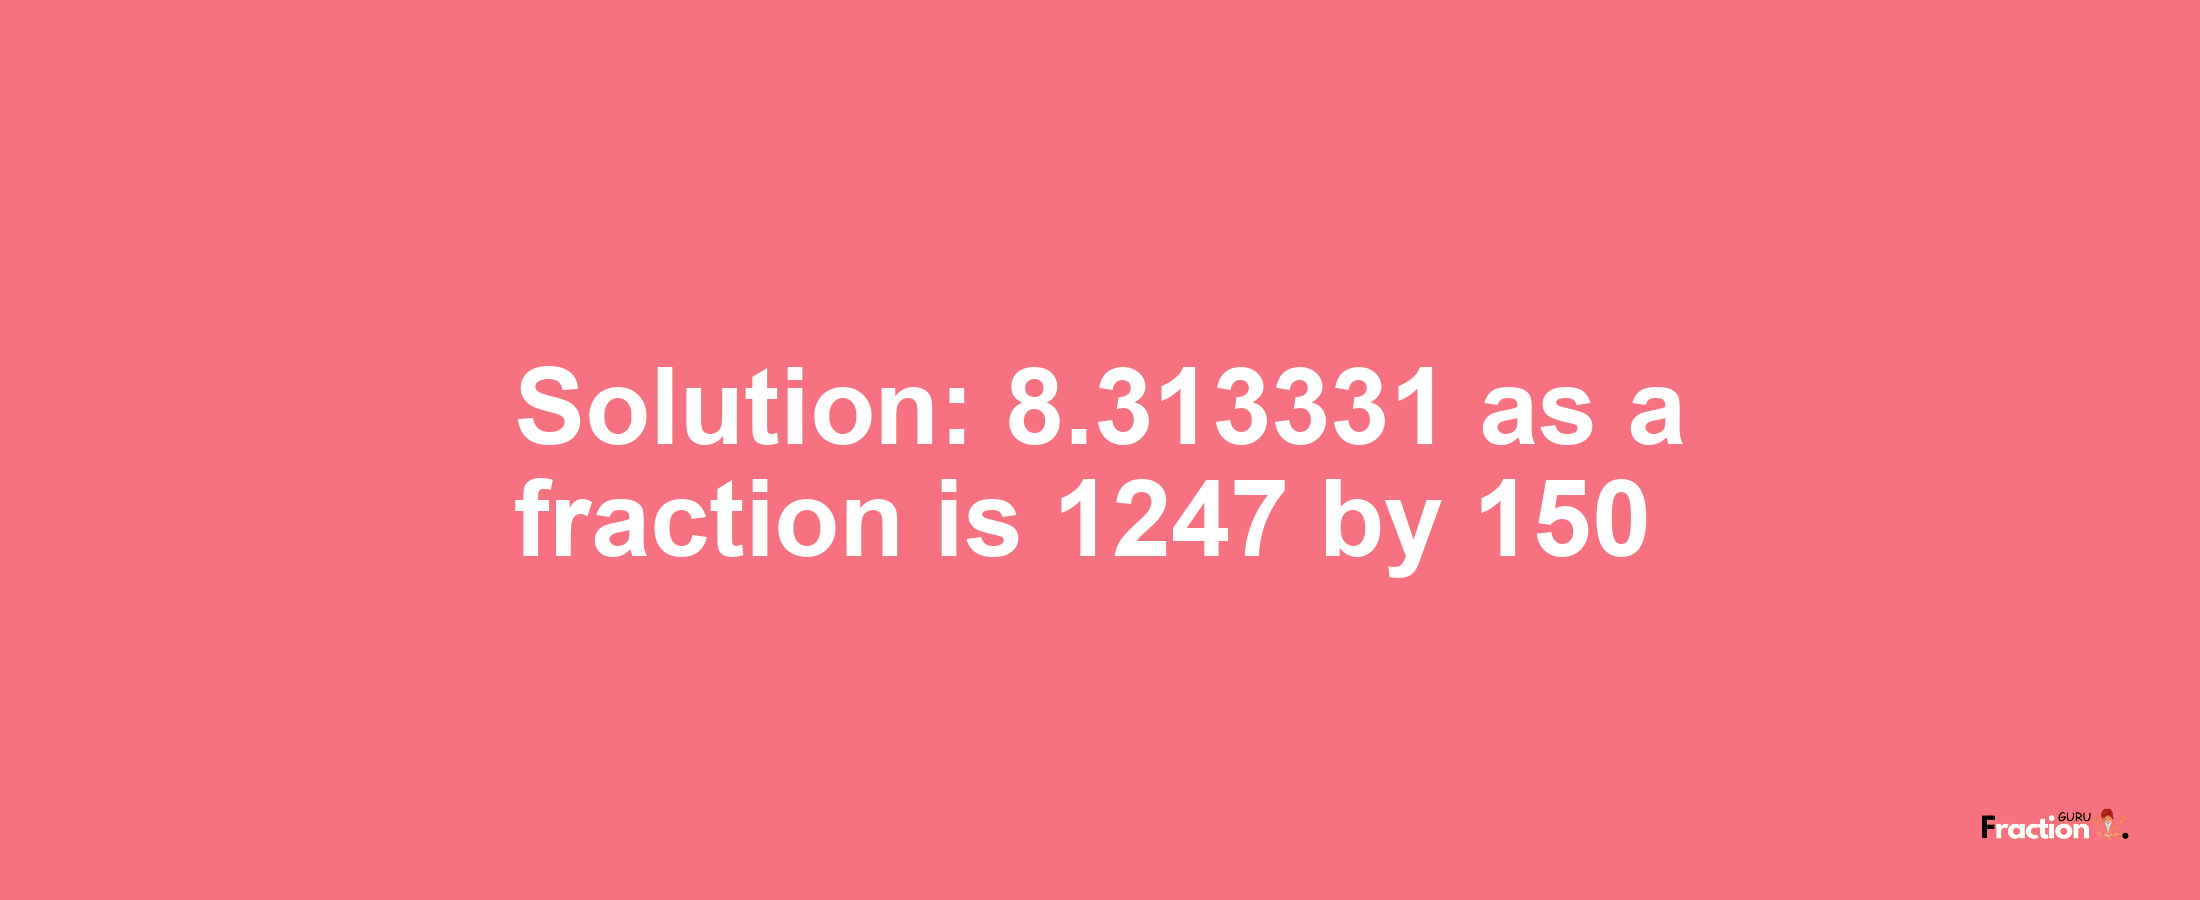 Solution:8.313331 as a fraction is 1247/150